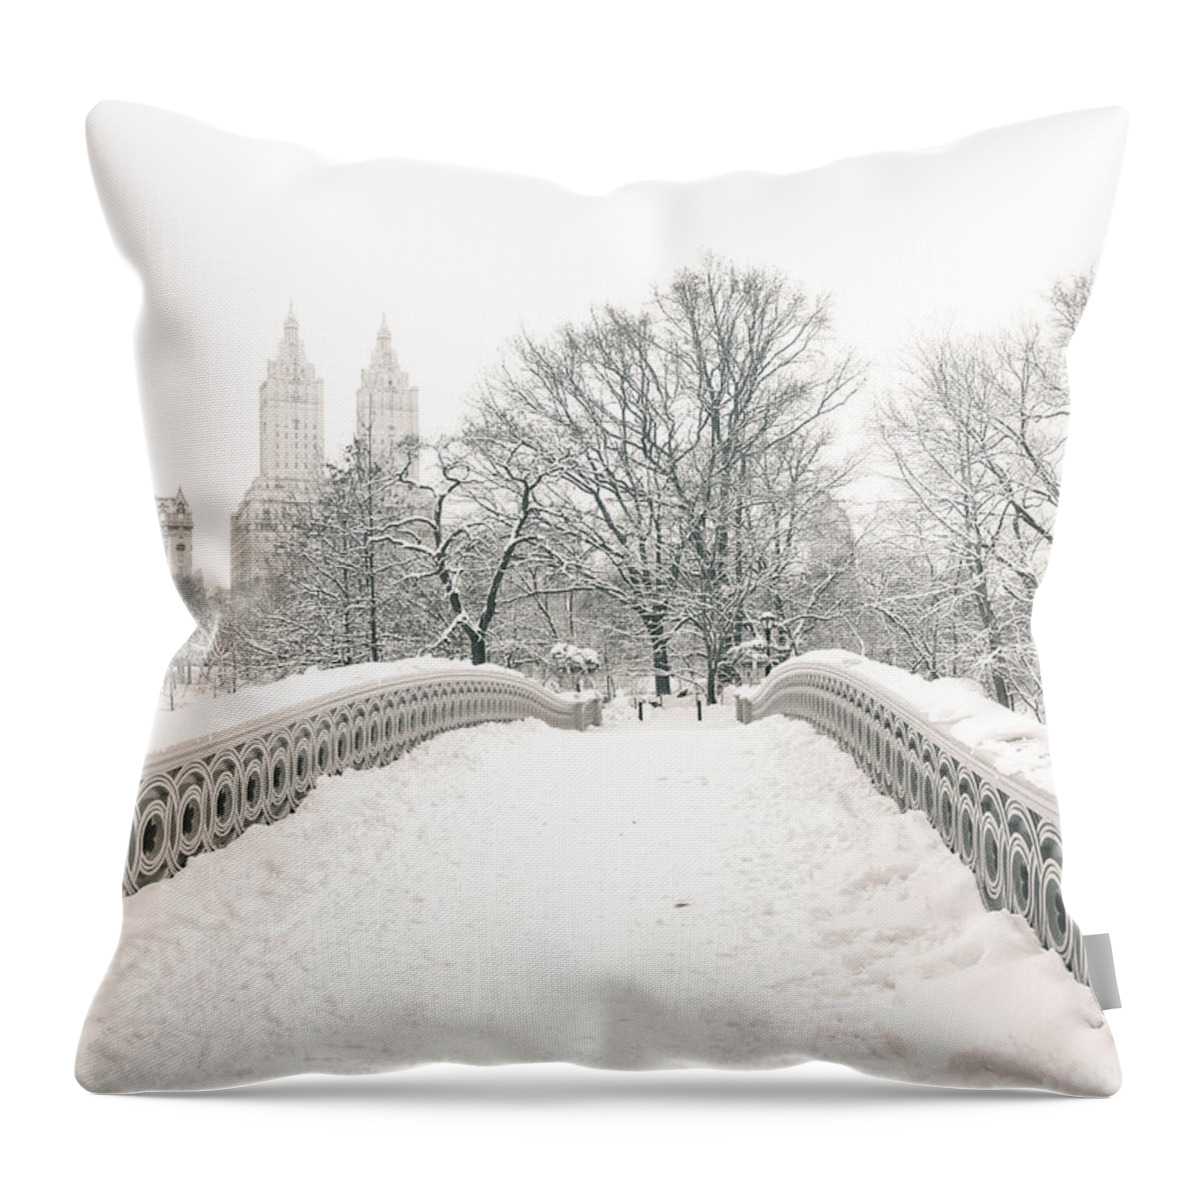 Nyc Throw Pillow featuring the photograph Winter - Central Park - Bow Bridge - New York City by Vivienne Gucwa